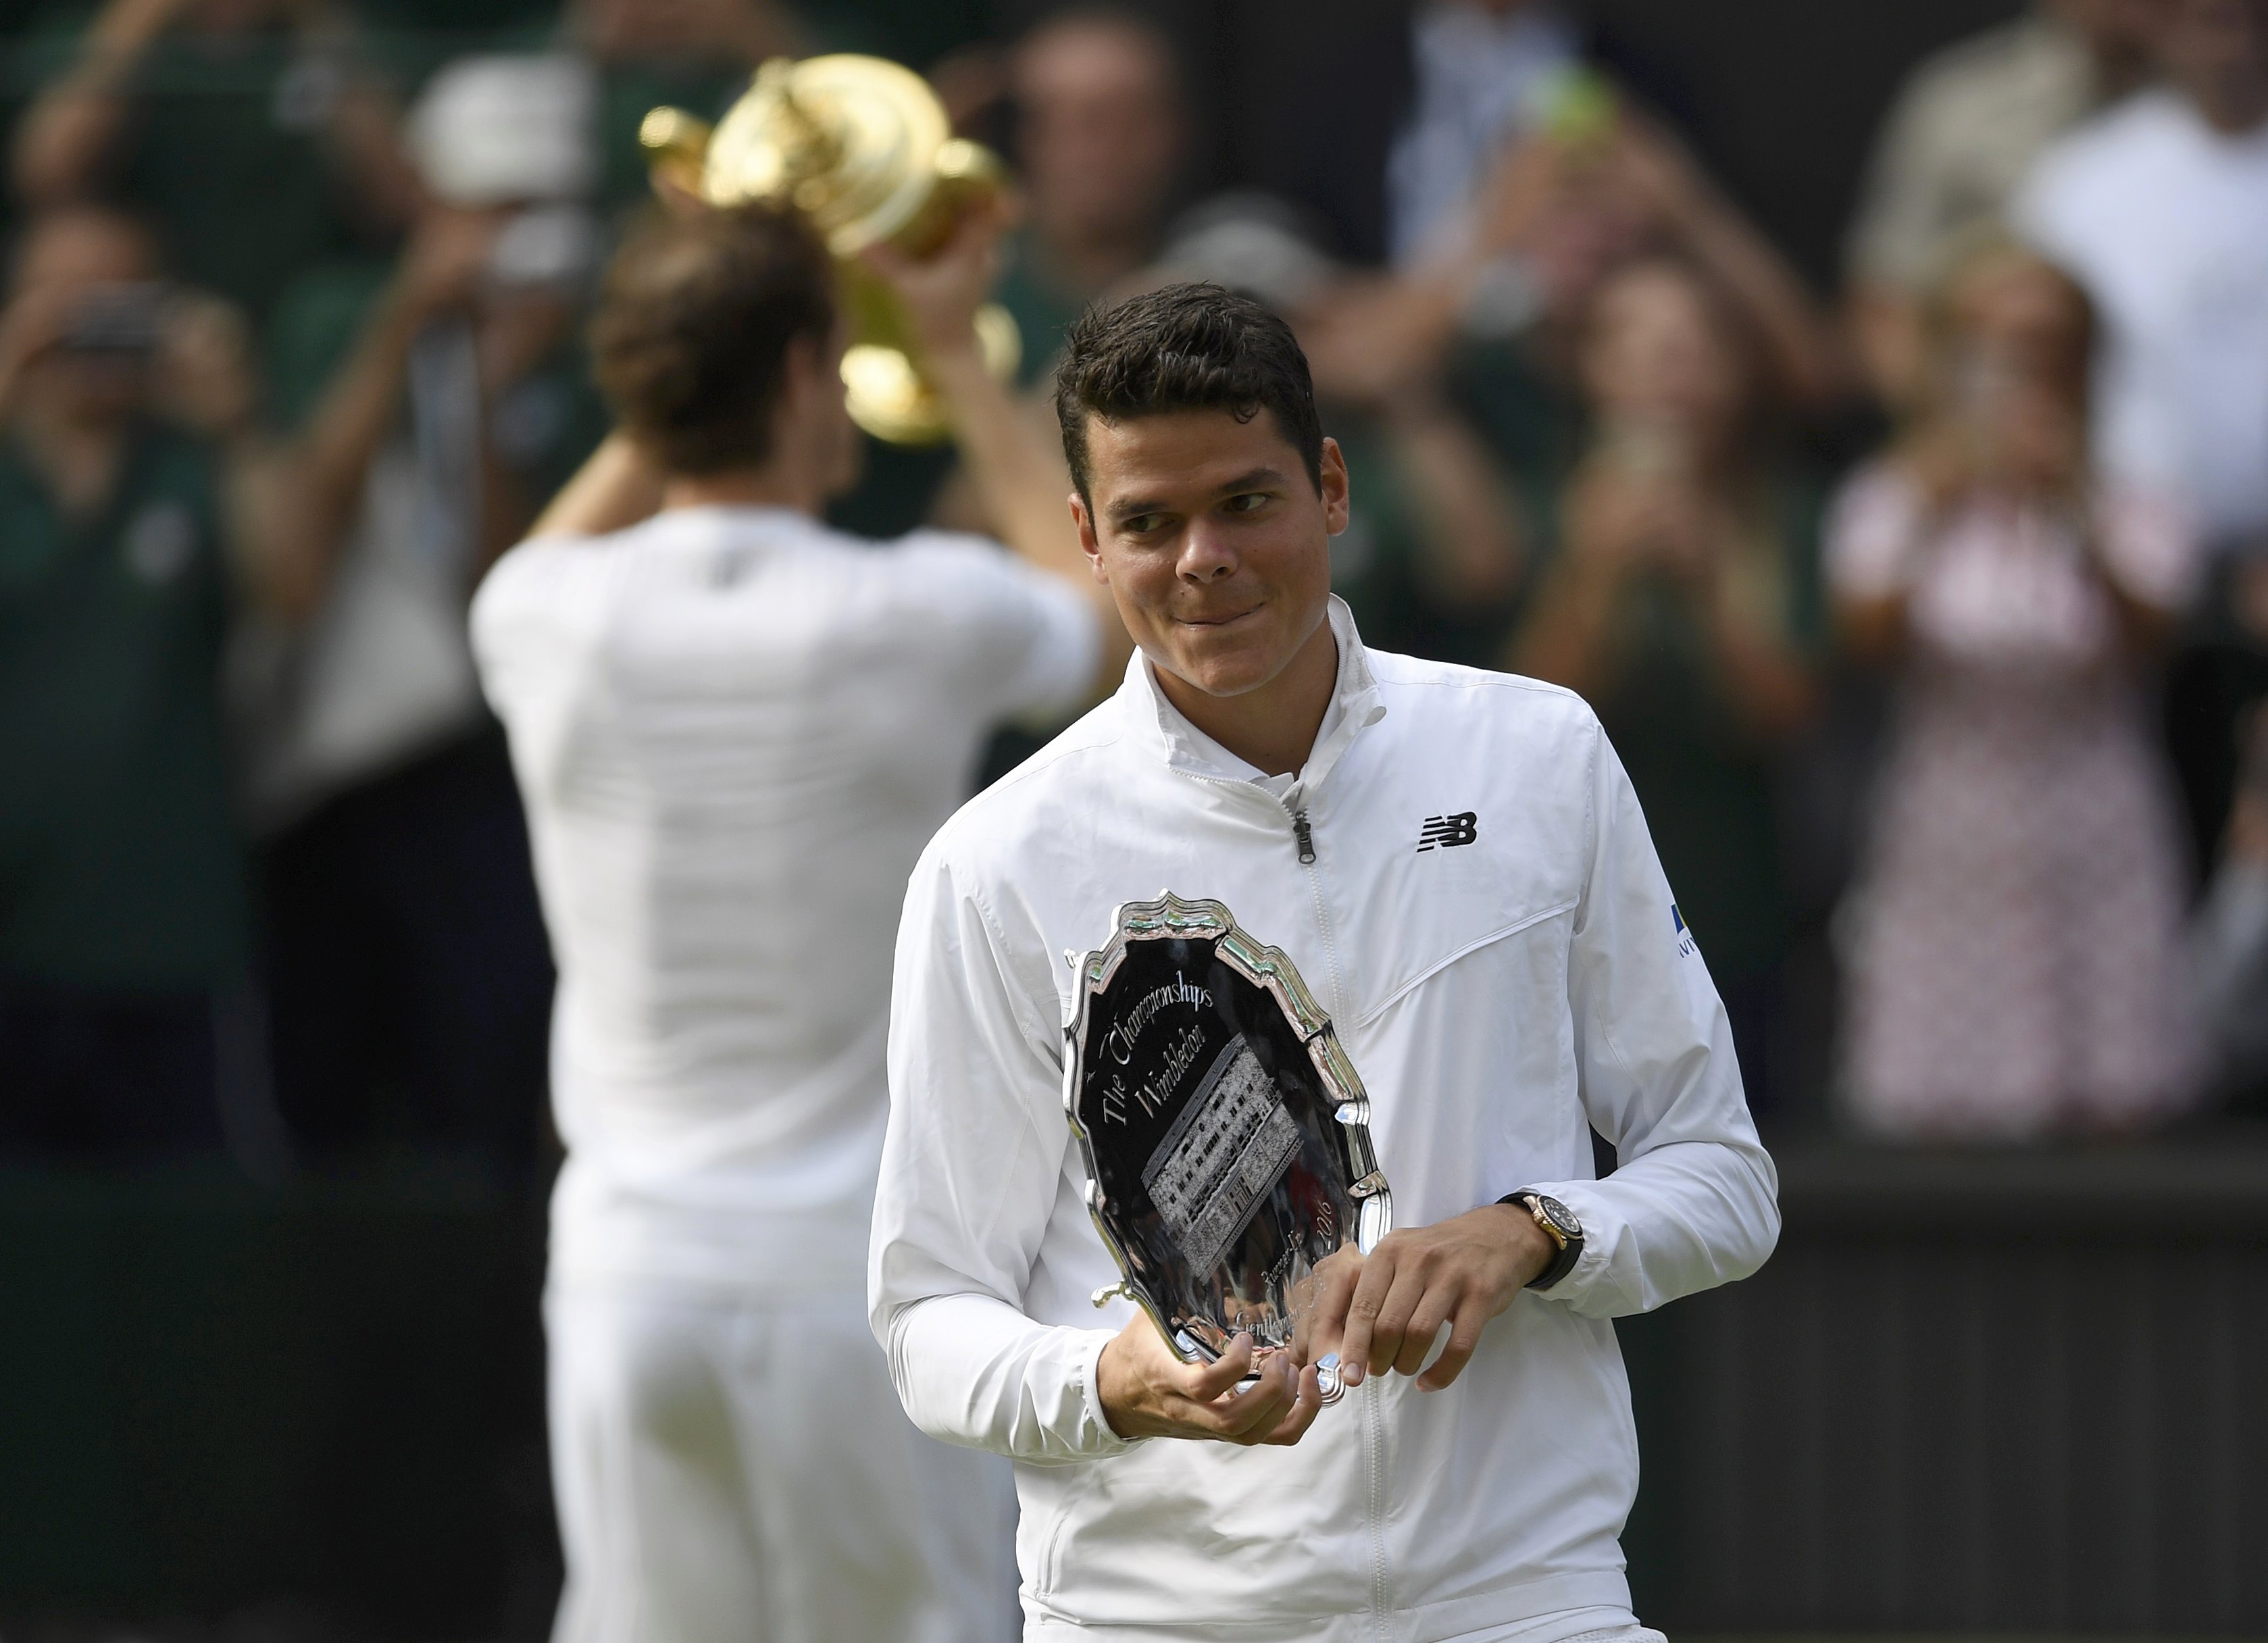 Tennis: I will leave no stone unturned to win a slam, says Raonic